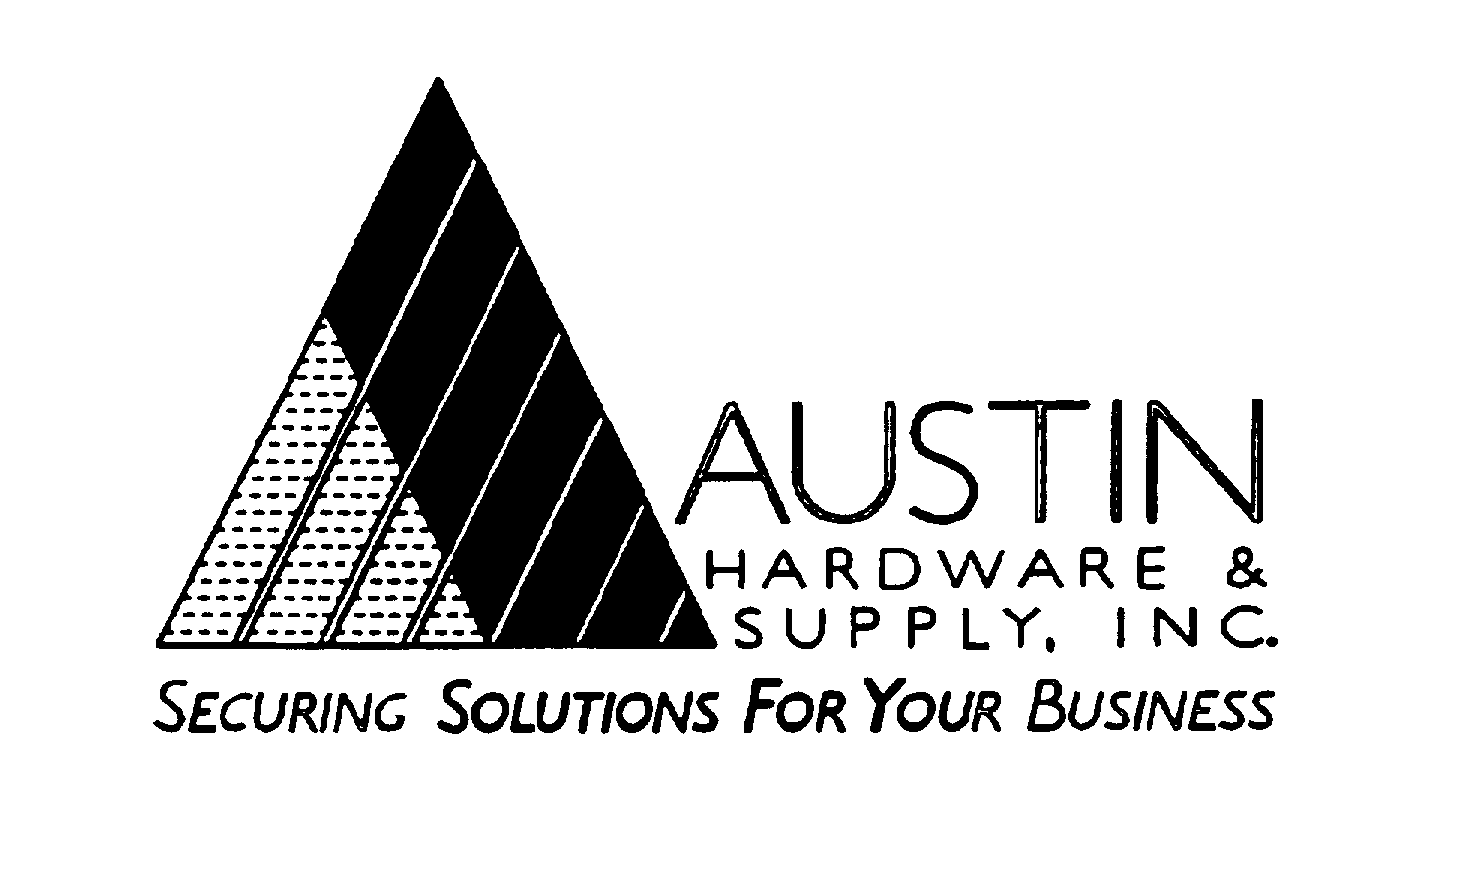  AUSTIN HARDWARE &amp; SUPPLY, INC. SECURING SOLUTIONS FOR YOUR BUSINESS